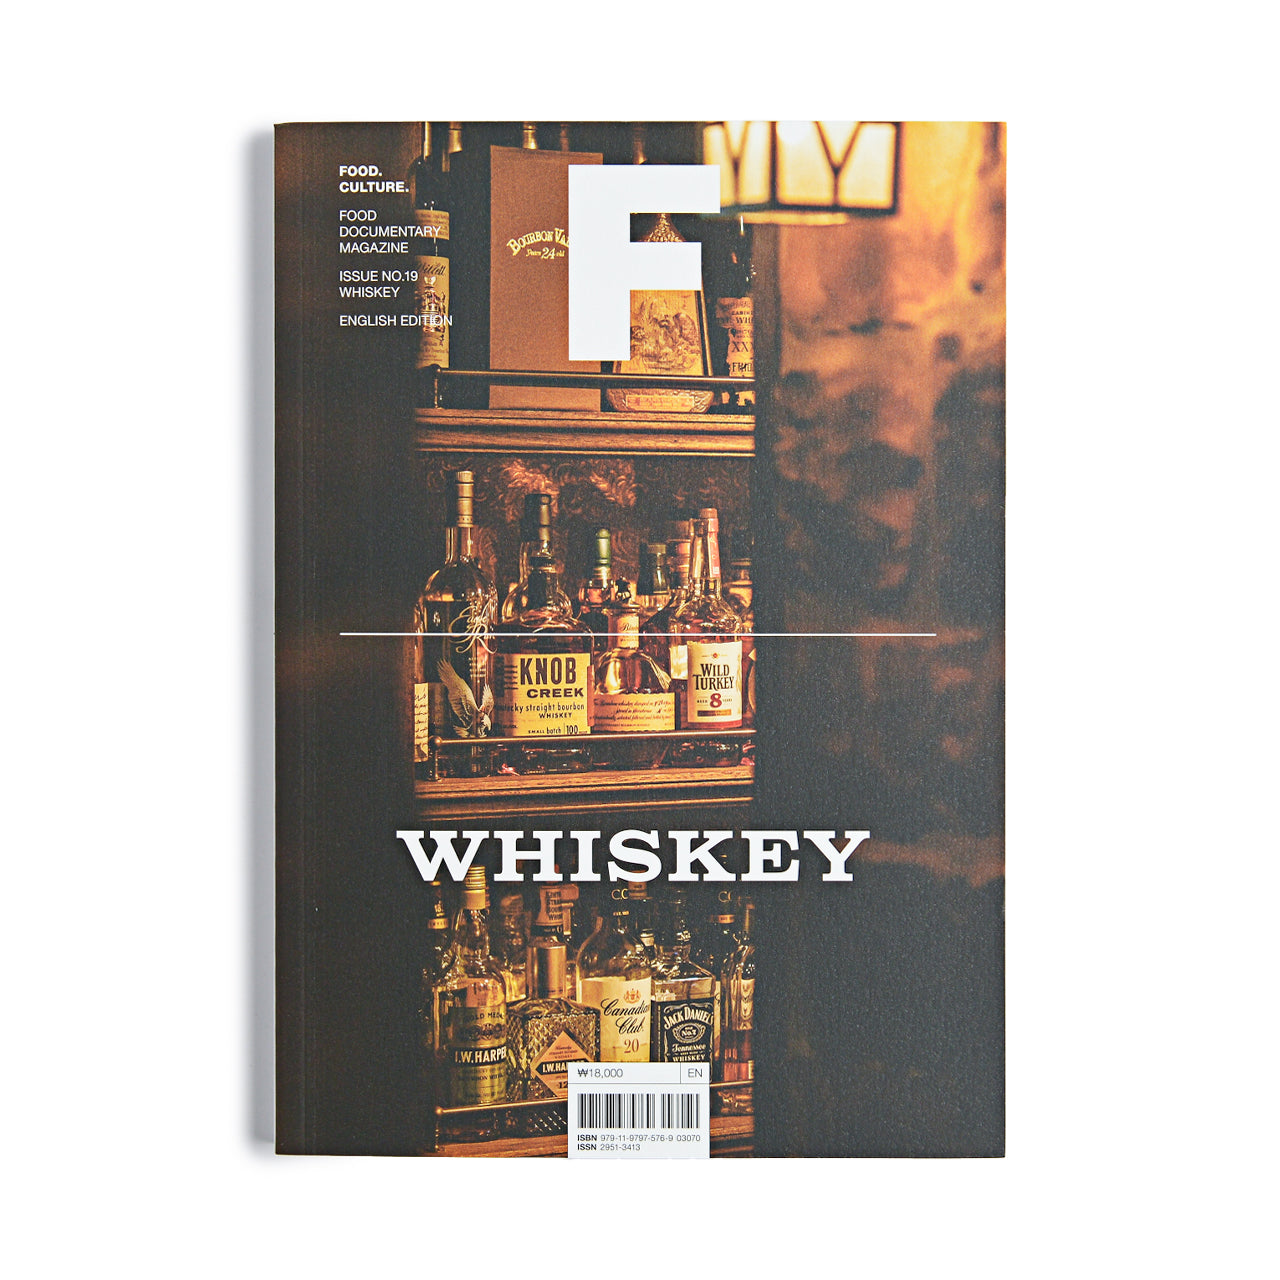 Magazine F: Whiskey | Uncrate, #Magazine #Whiskey #Uncrate